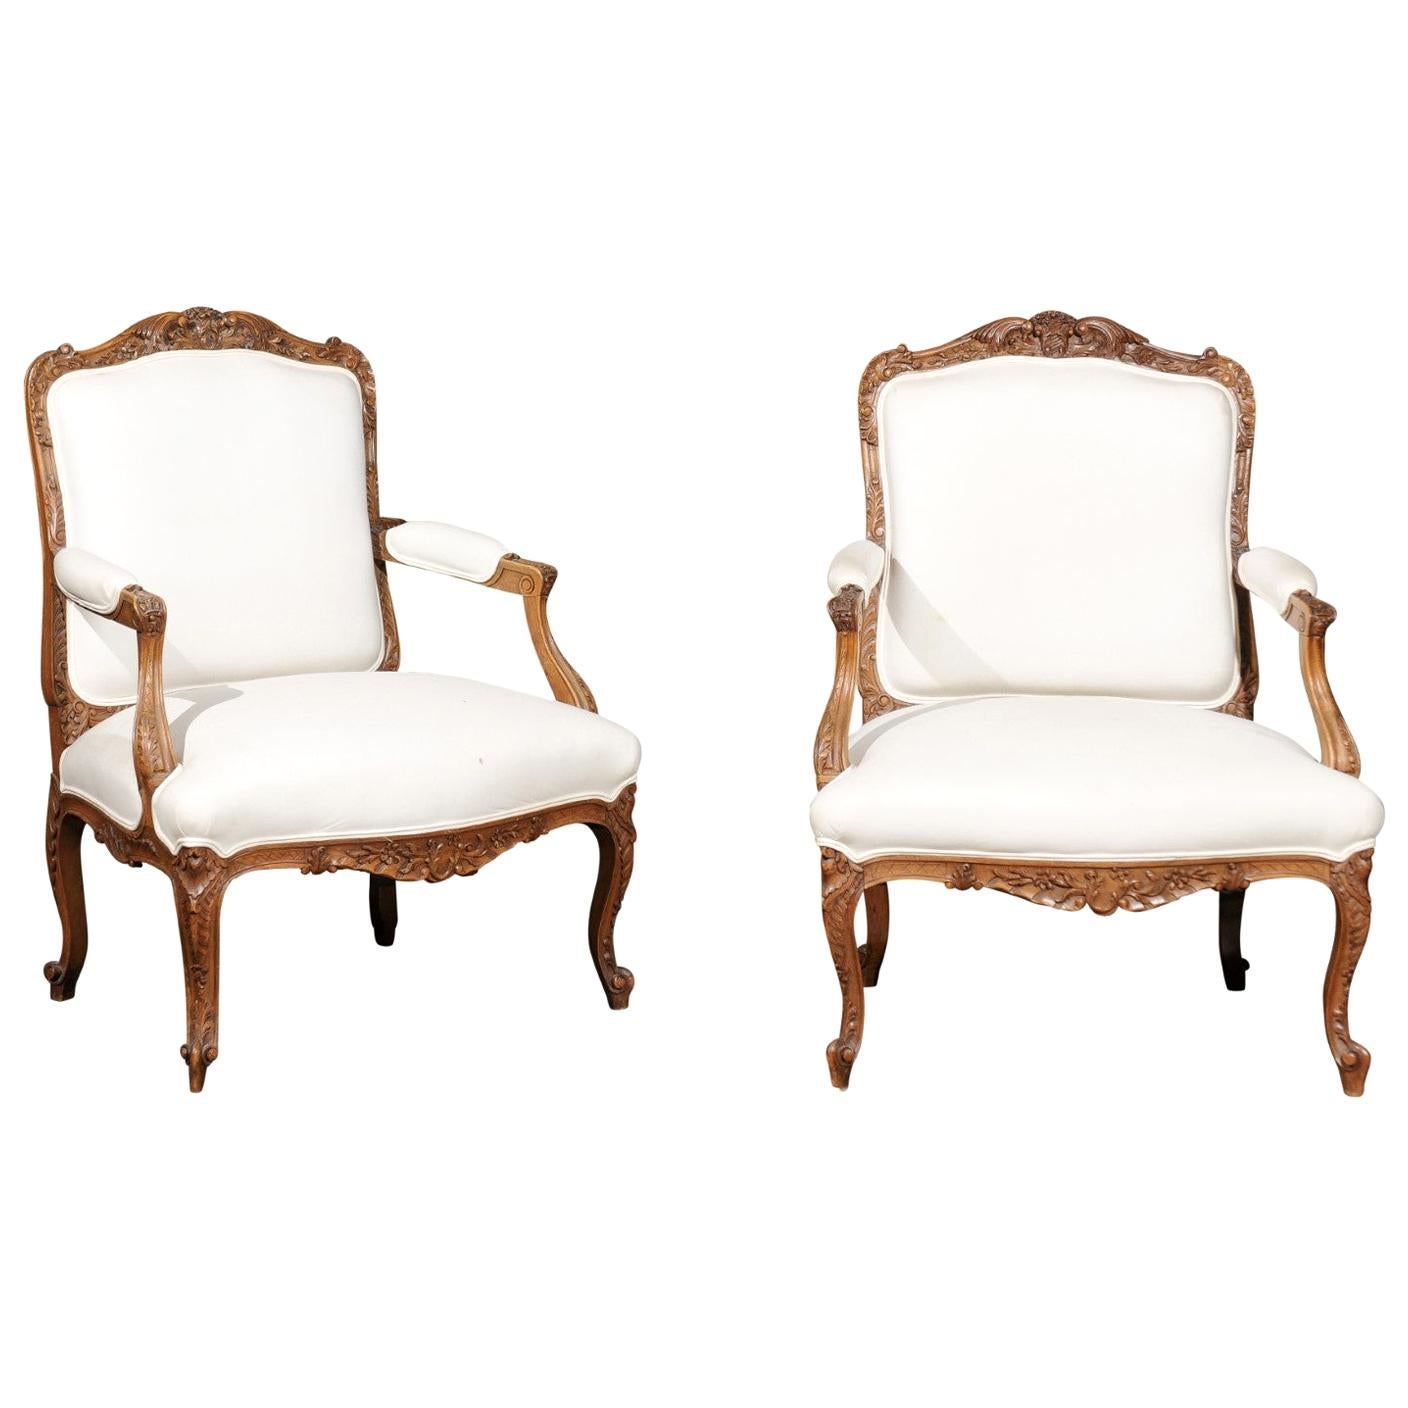 Pair of Italian 19th Century Rococo Style Carved Walnut Upholstered Armchairs For Sale